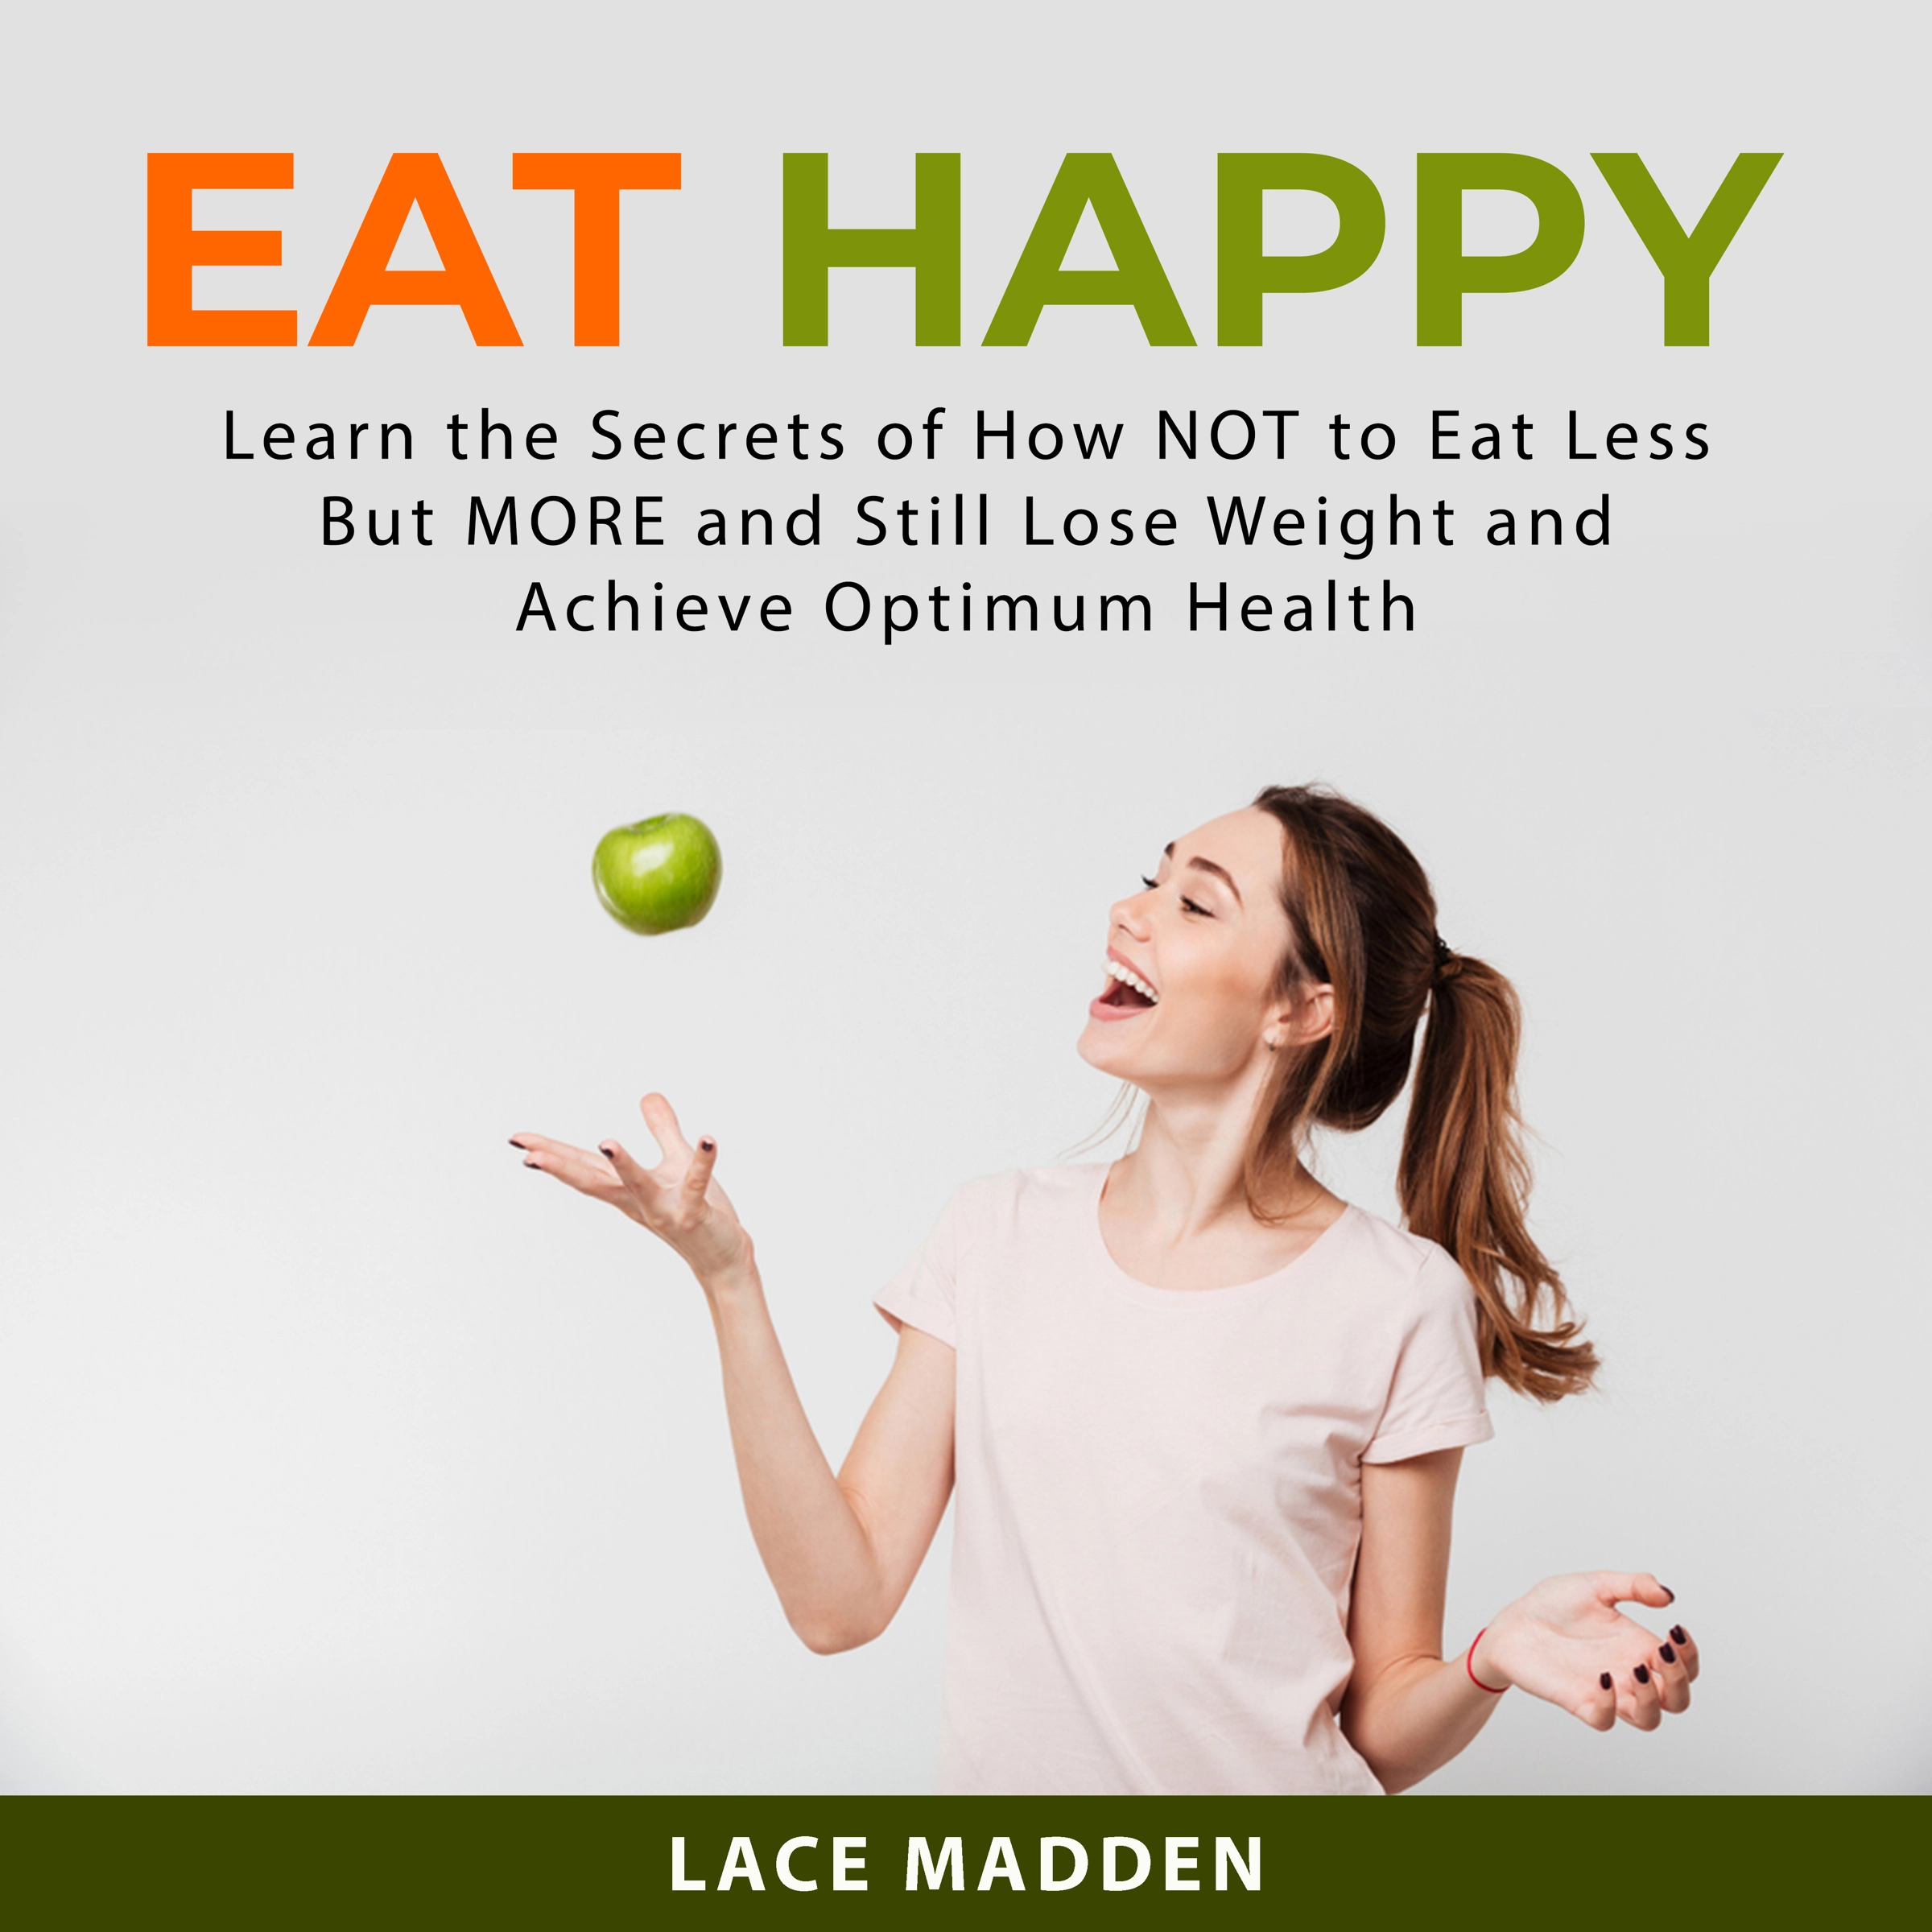 Eat Happy Audiobook by Lace Madden